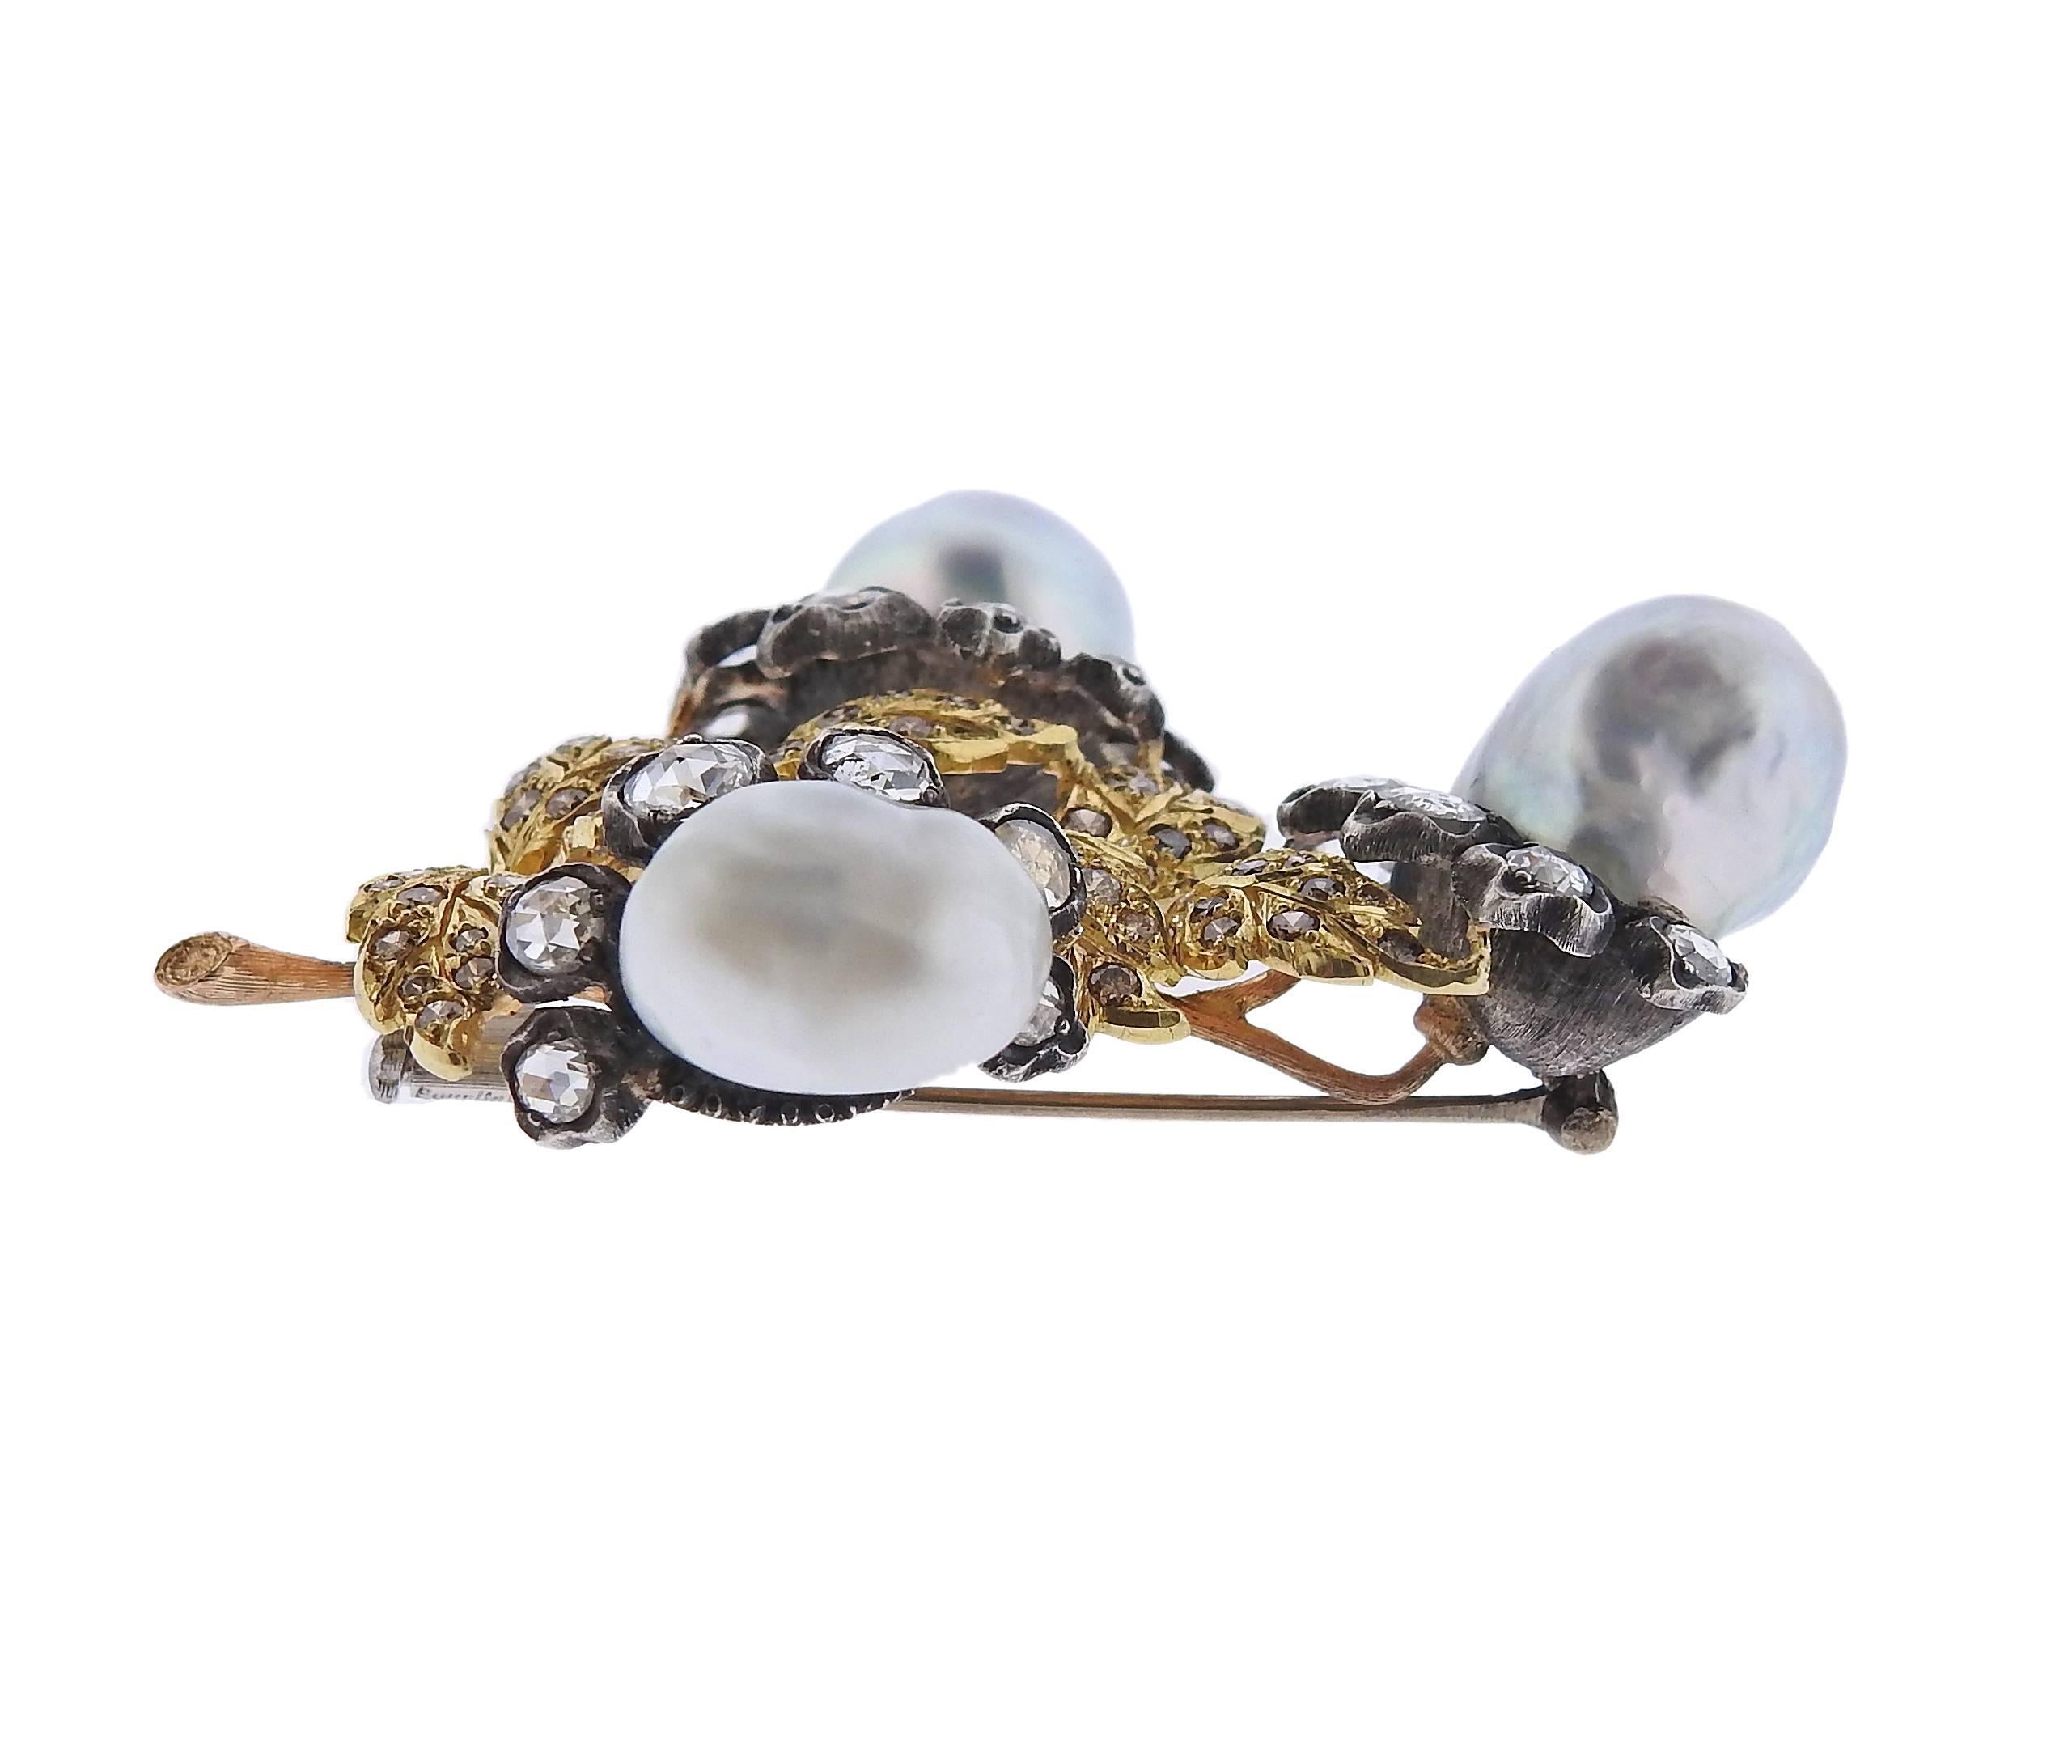 An 18k gold silver Buccellati brooch featuring rose cut diamonds and baroque pearls. Brooch measures 60mm X 55mm. Marked 750, L3263, Buccellati, 18k, Italy . Weight is 31.8 grams. 